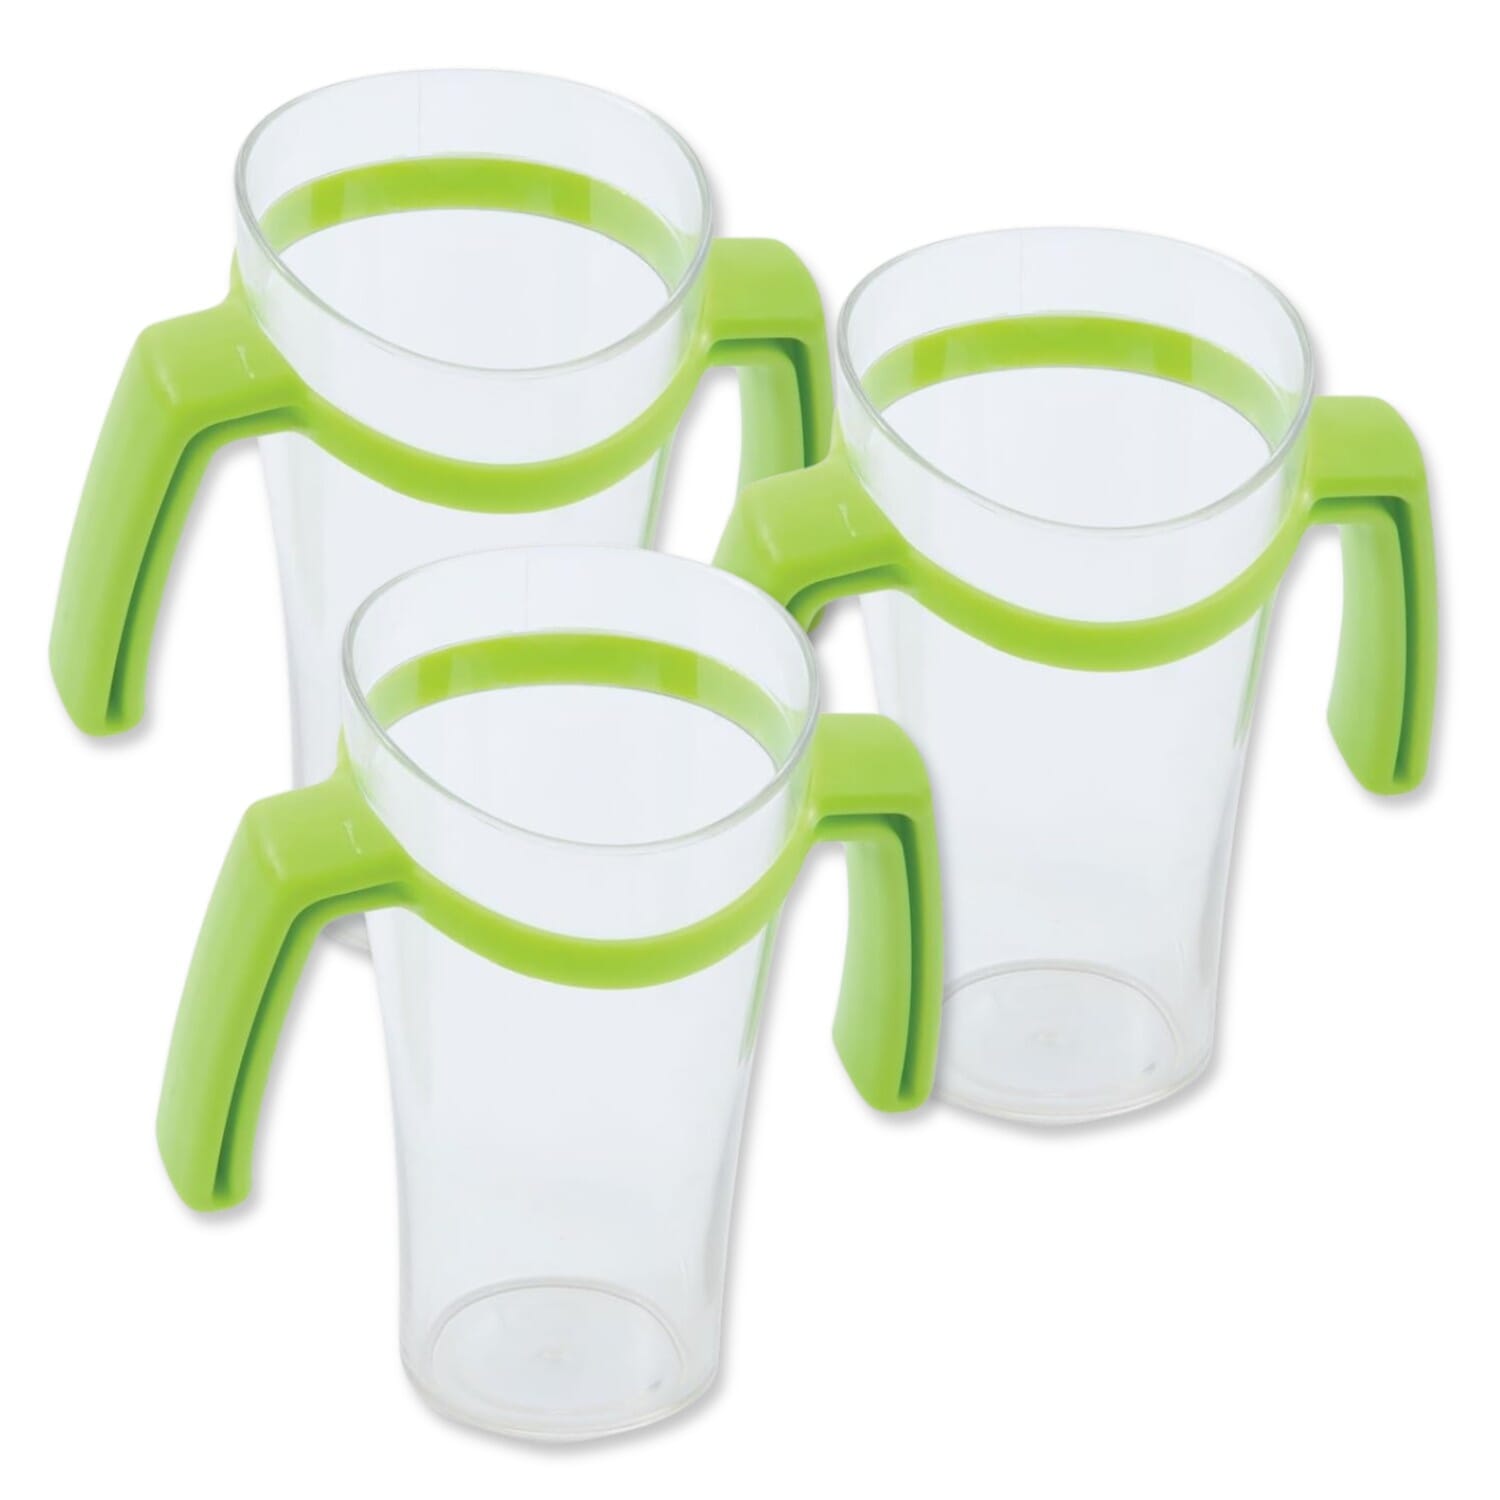 View Deluxe Nosy Cup with Handles Pack of 3 information